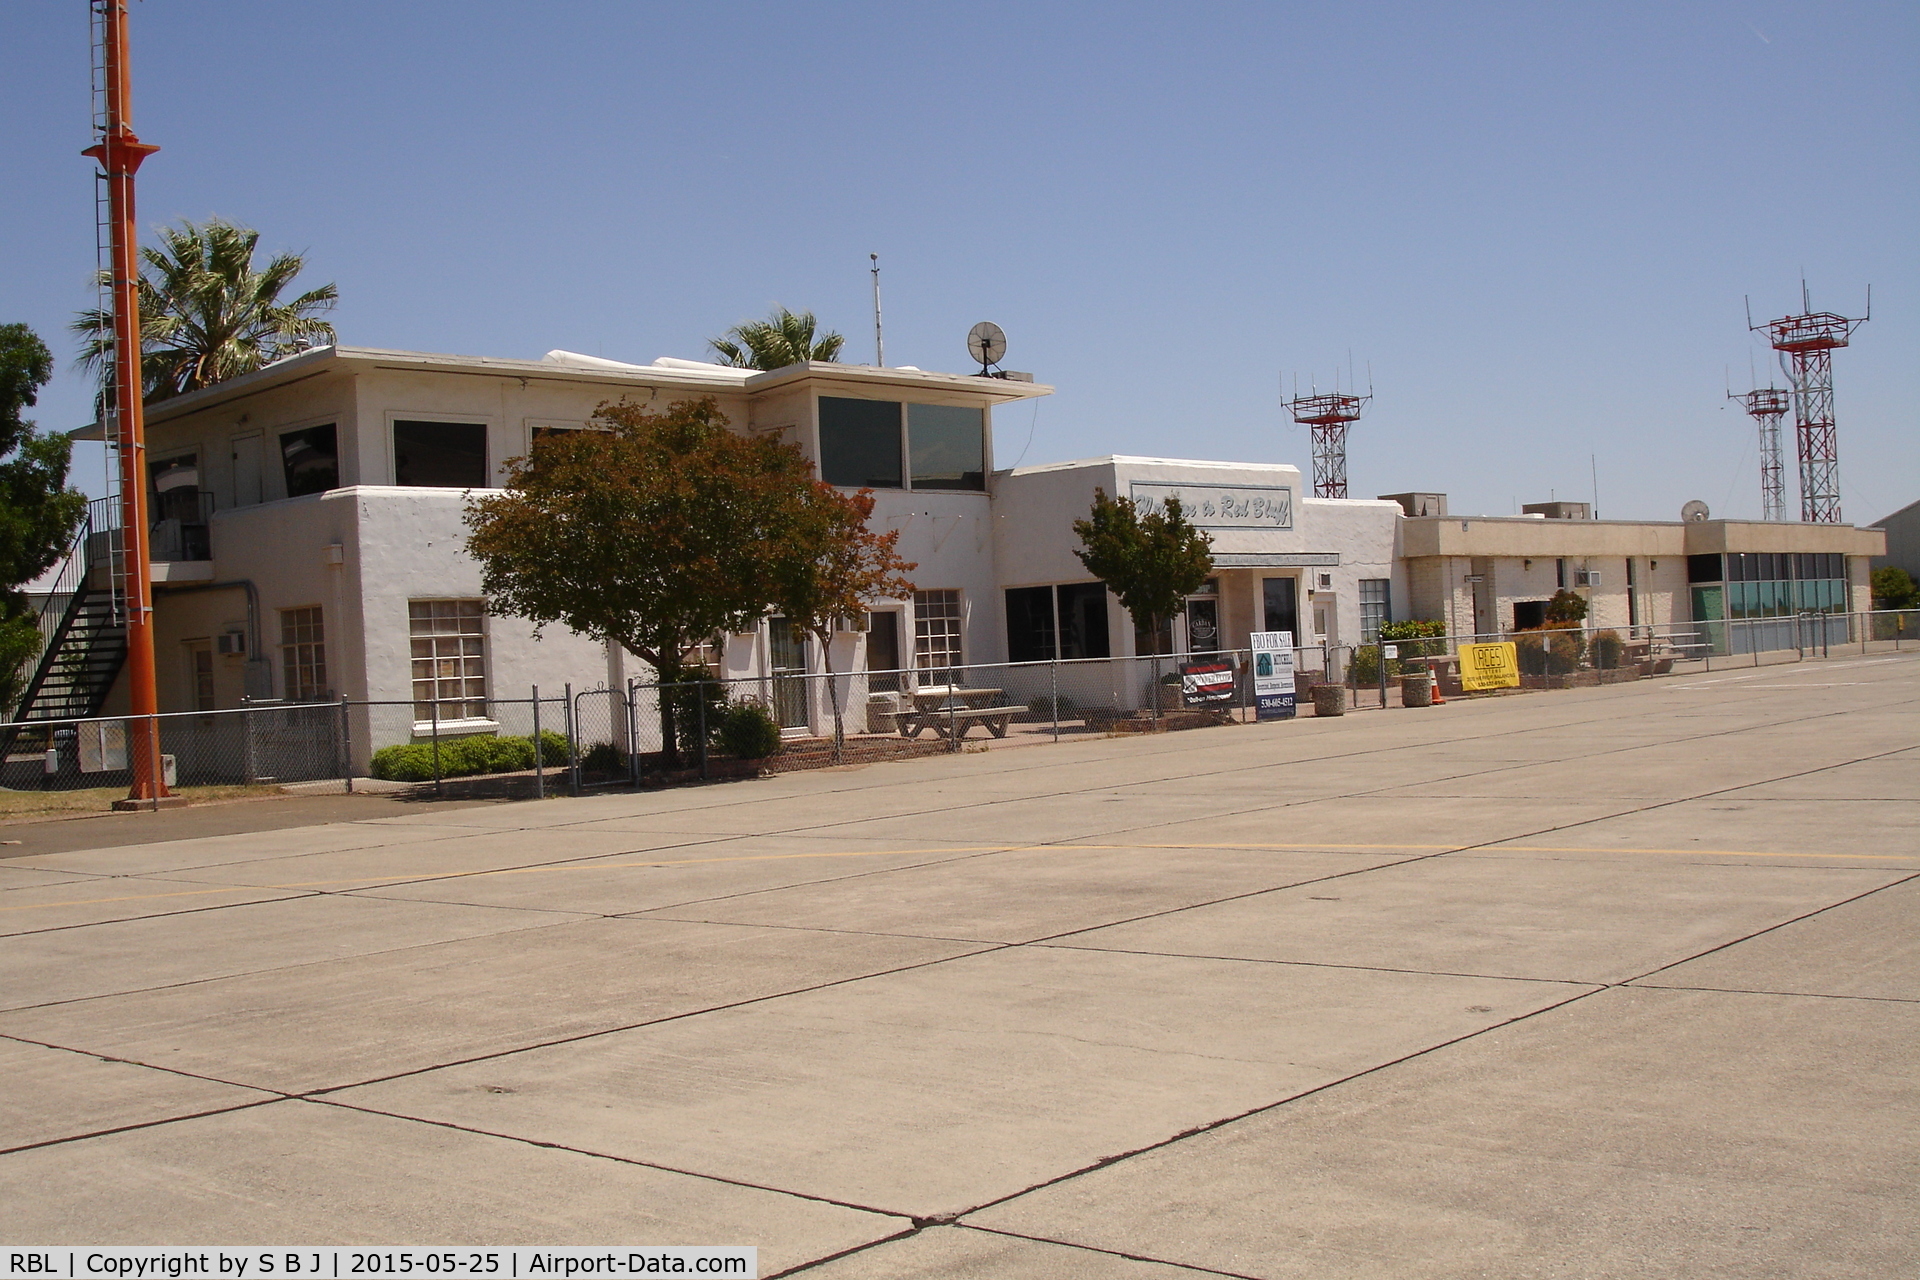 Red Bluff Municipal Airport (RBL) - Red Bluff airport with ramp view of airport office and nice upstairs restaurant. The restaurant is a nice place to watch planes  land in the sometimes tricky Red Bluff winds.